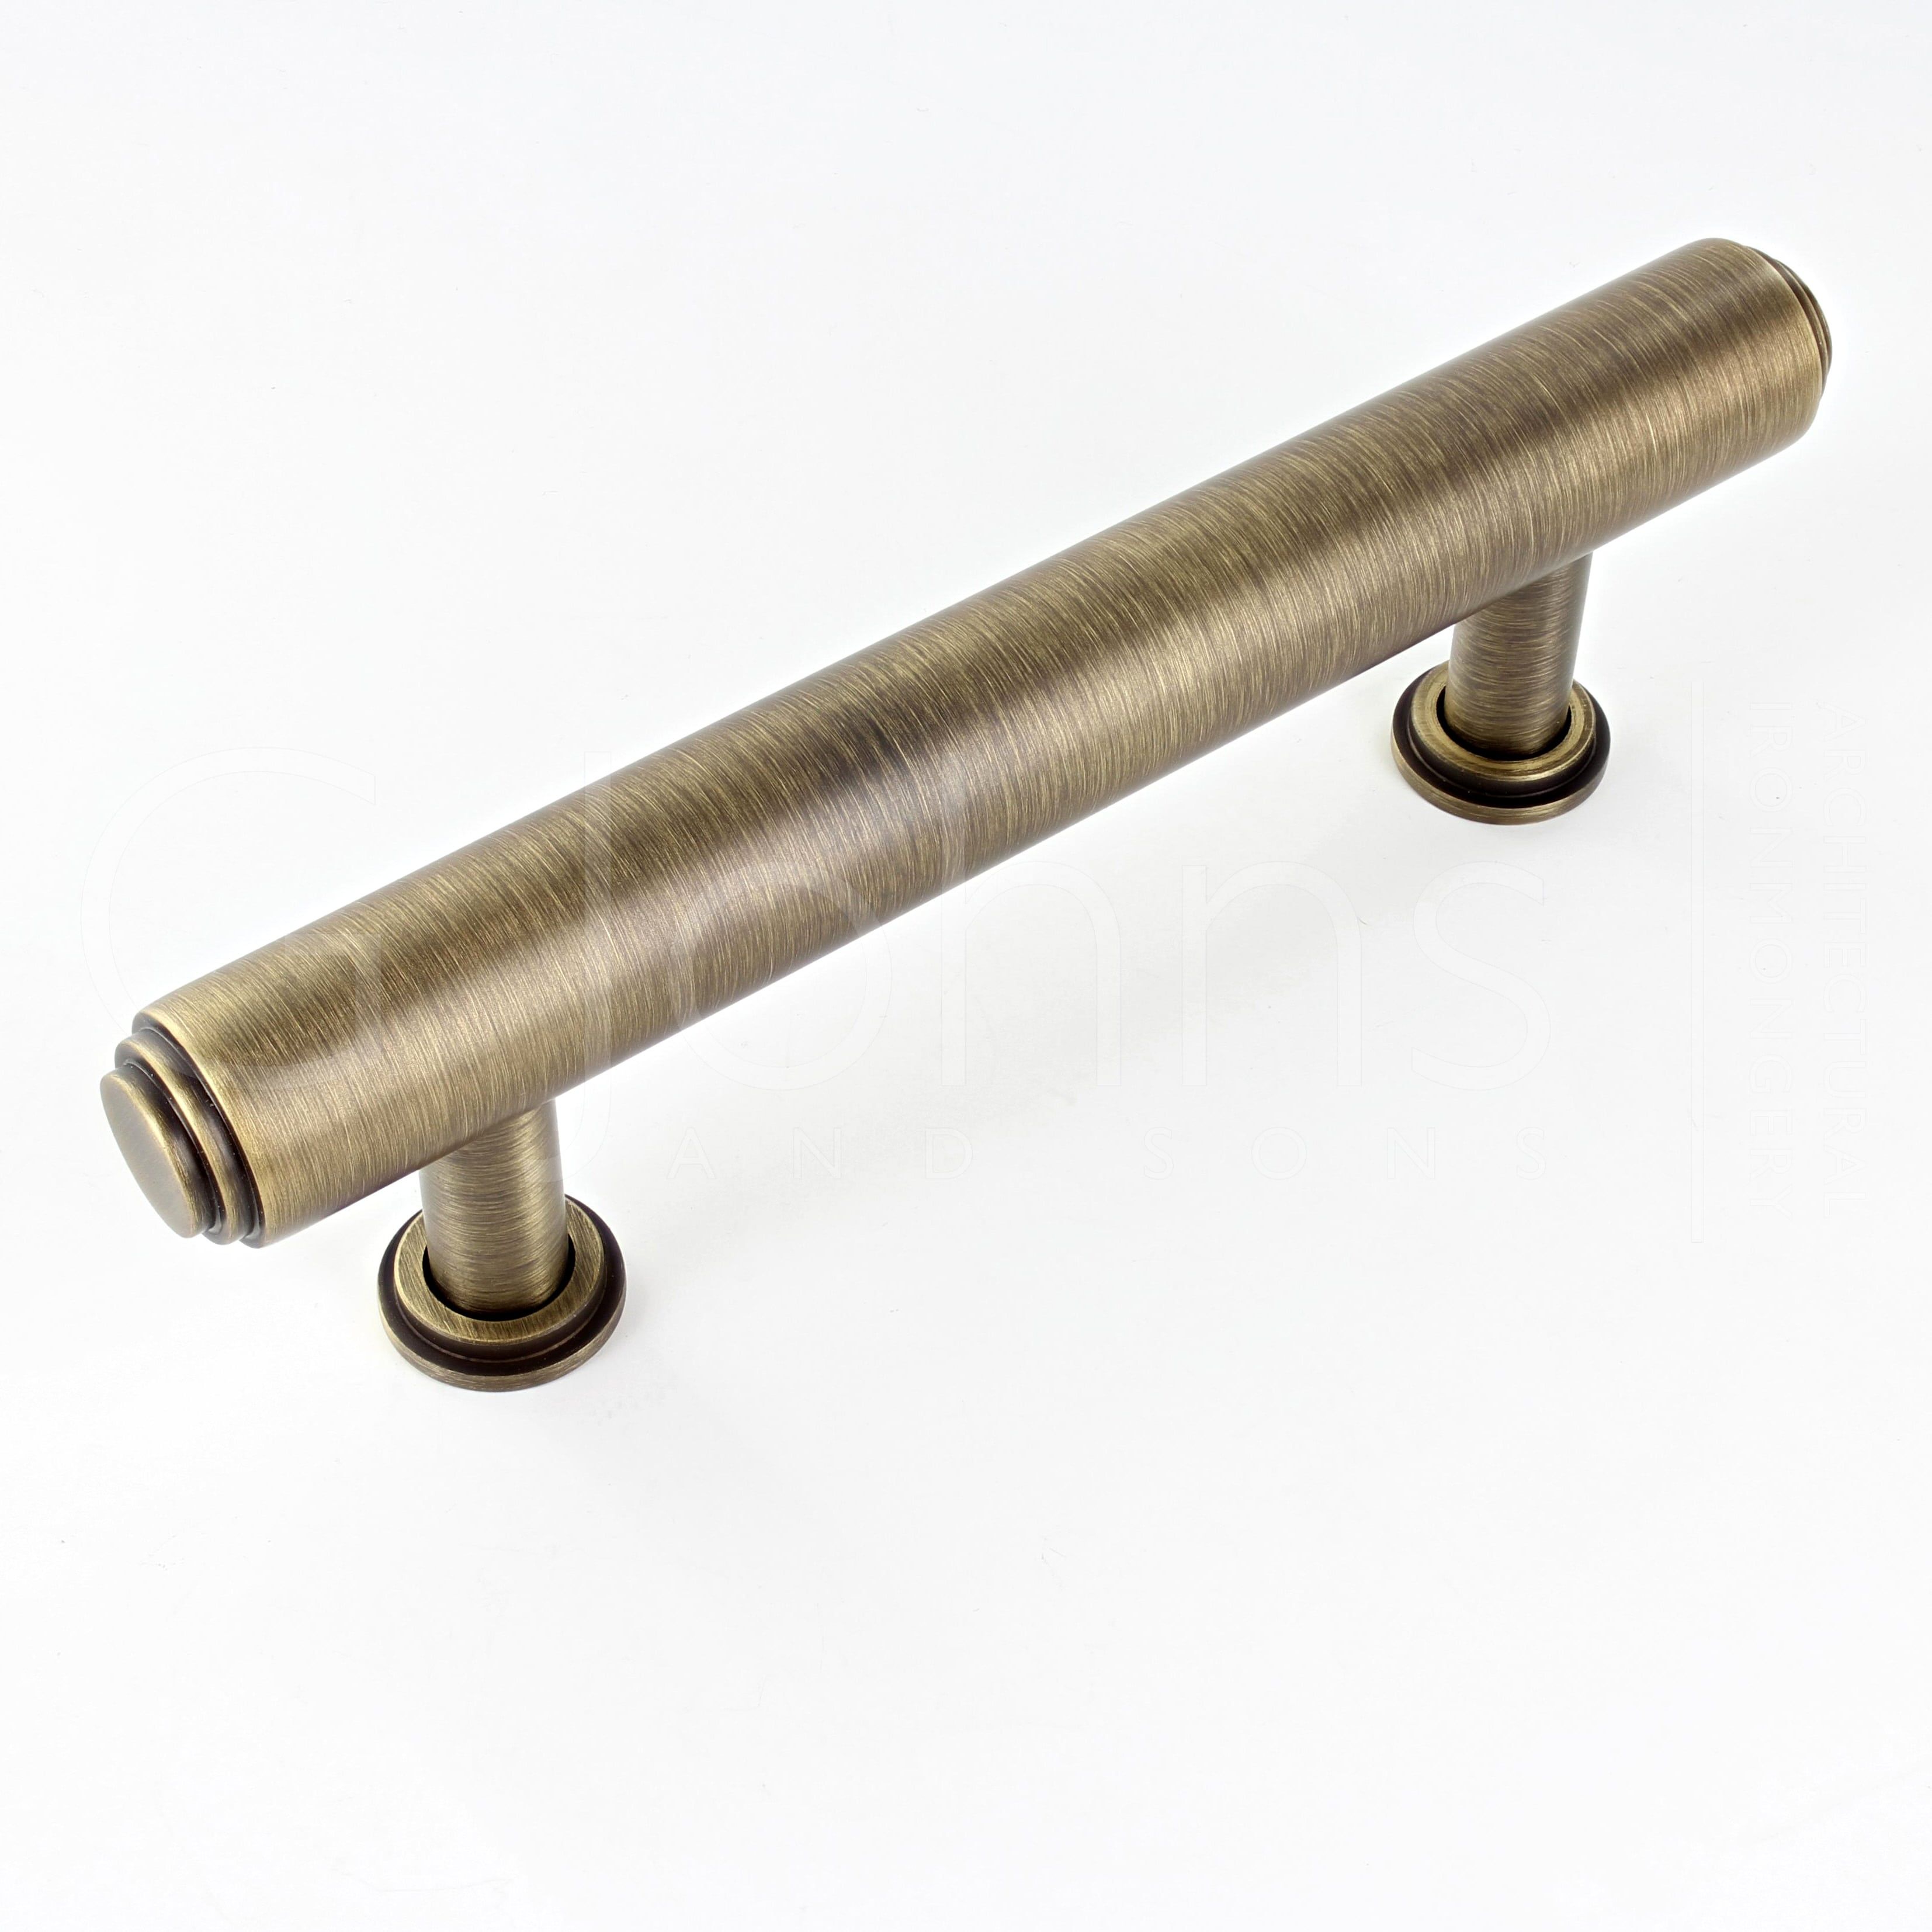 HIGHGATE Solid brass Cup Pull Handles